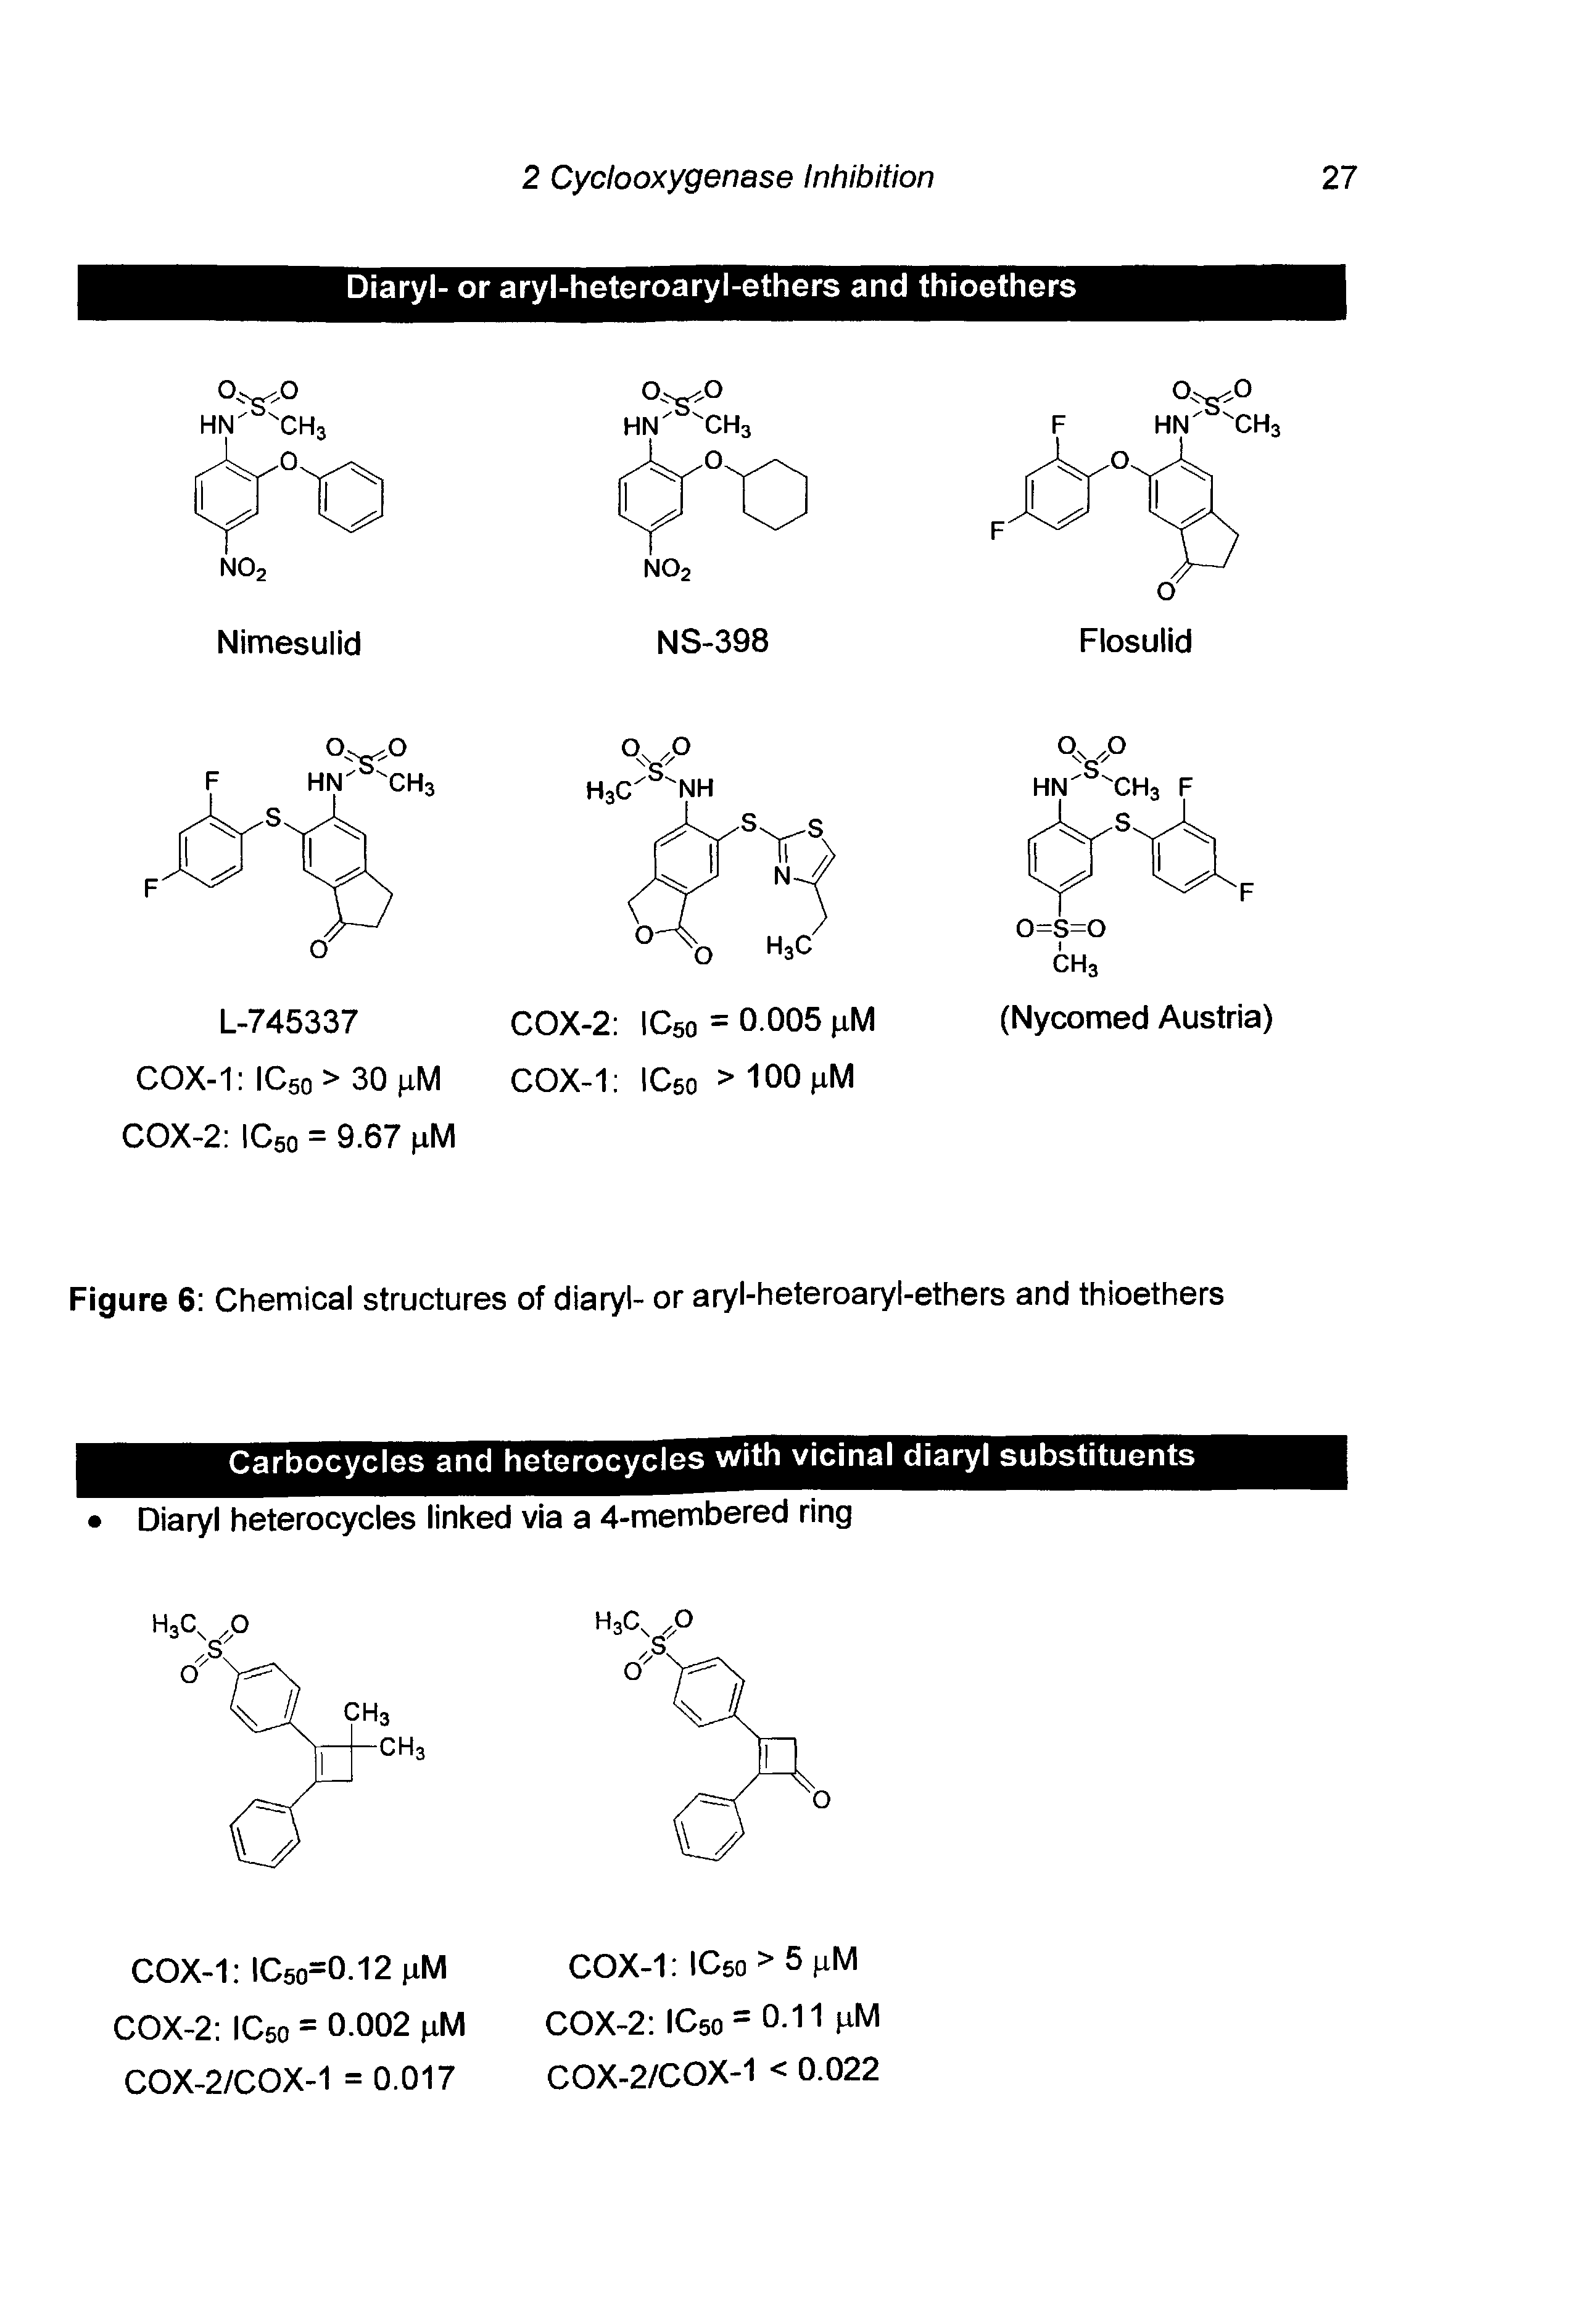 Figure 6 Chemical structures of diaryl- or aryl-heteroaryl-ethers and thioethers...